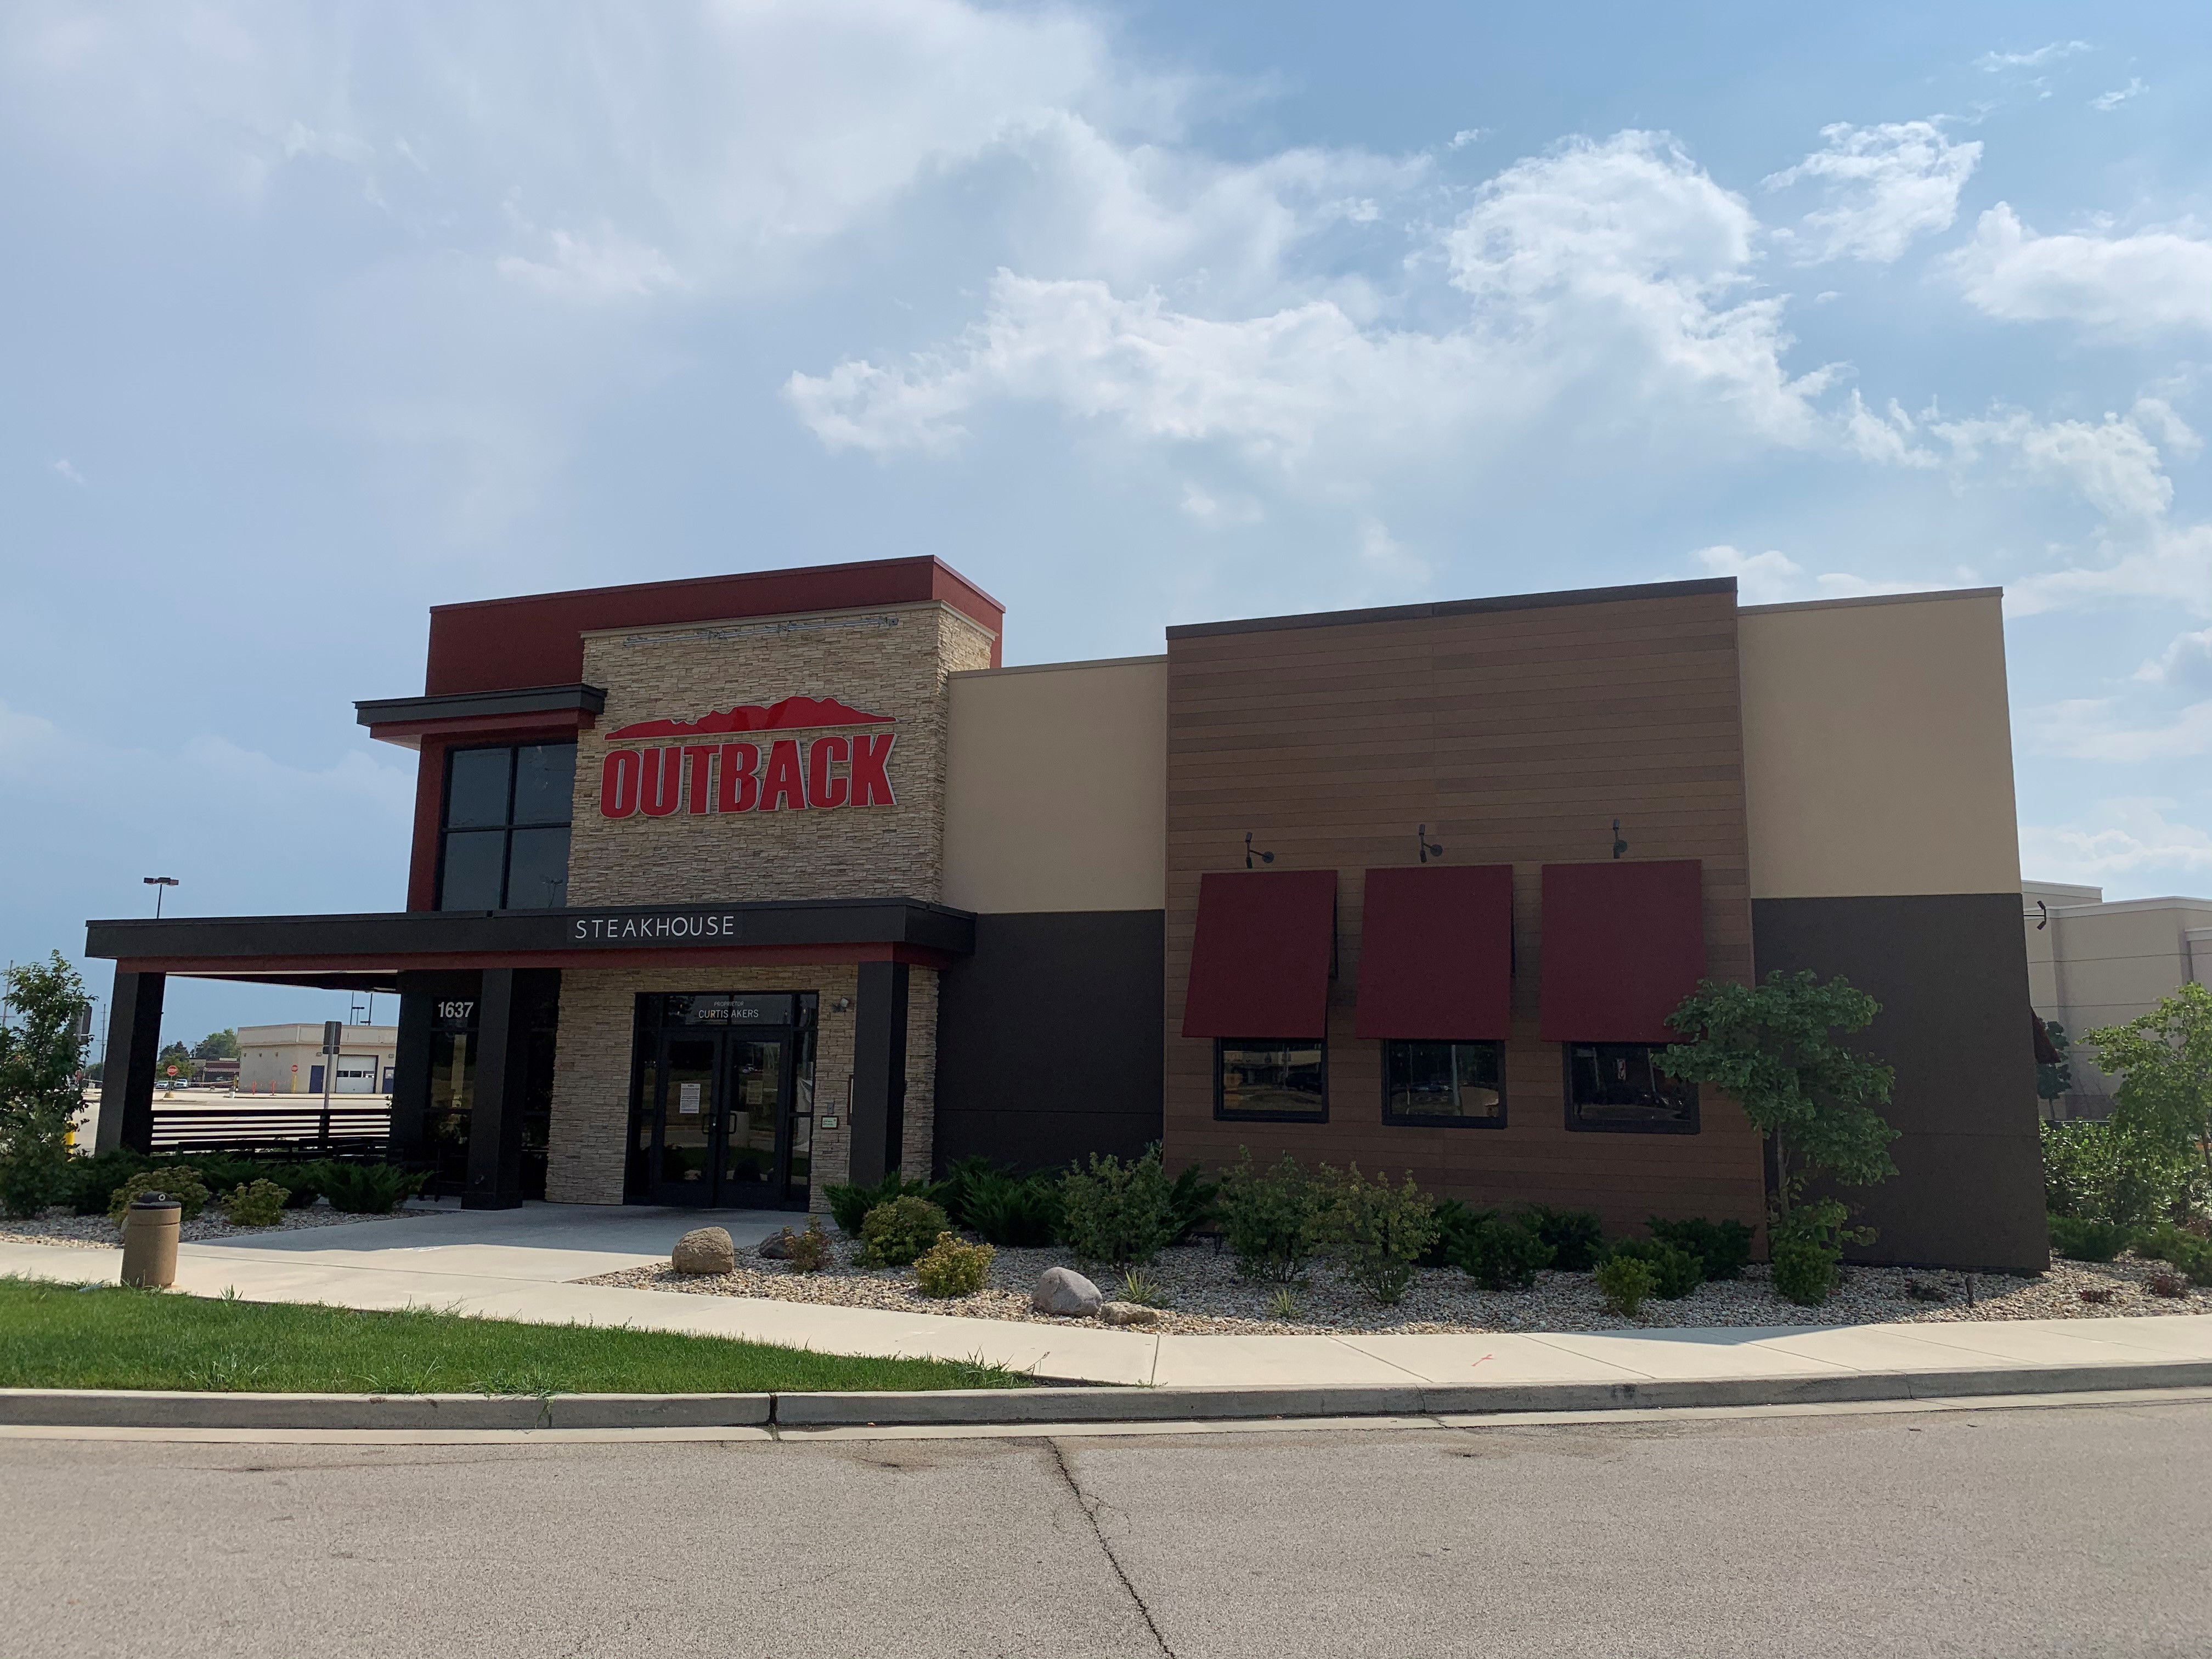 Outback Steakhouse - Bloomington, IL 61701 - (309)663-0455 | ShowMeLocal.com